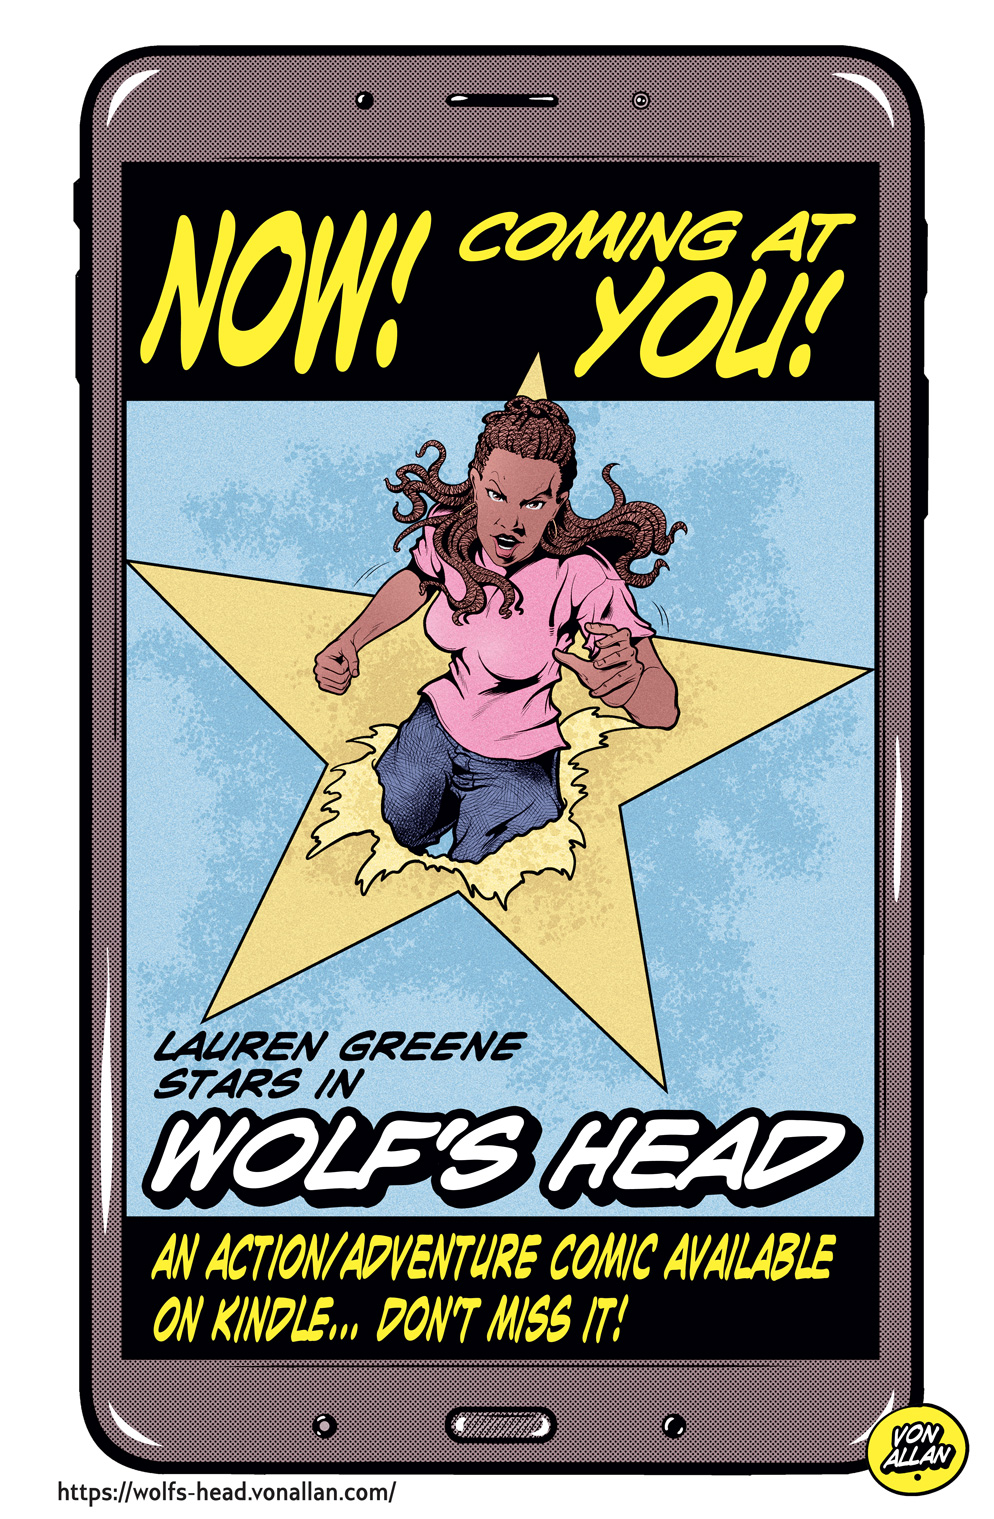 Promo of Lauren from Wolf's Head announcing the series debut on Kindle